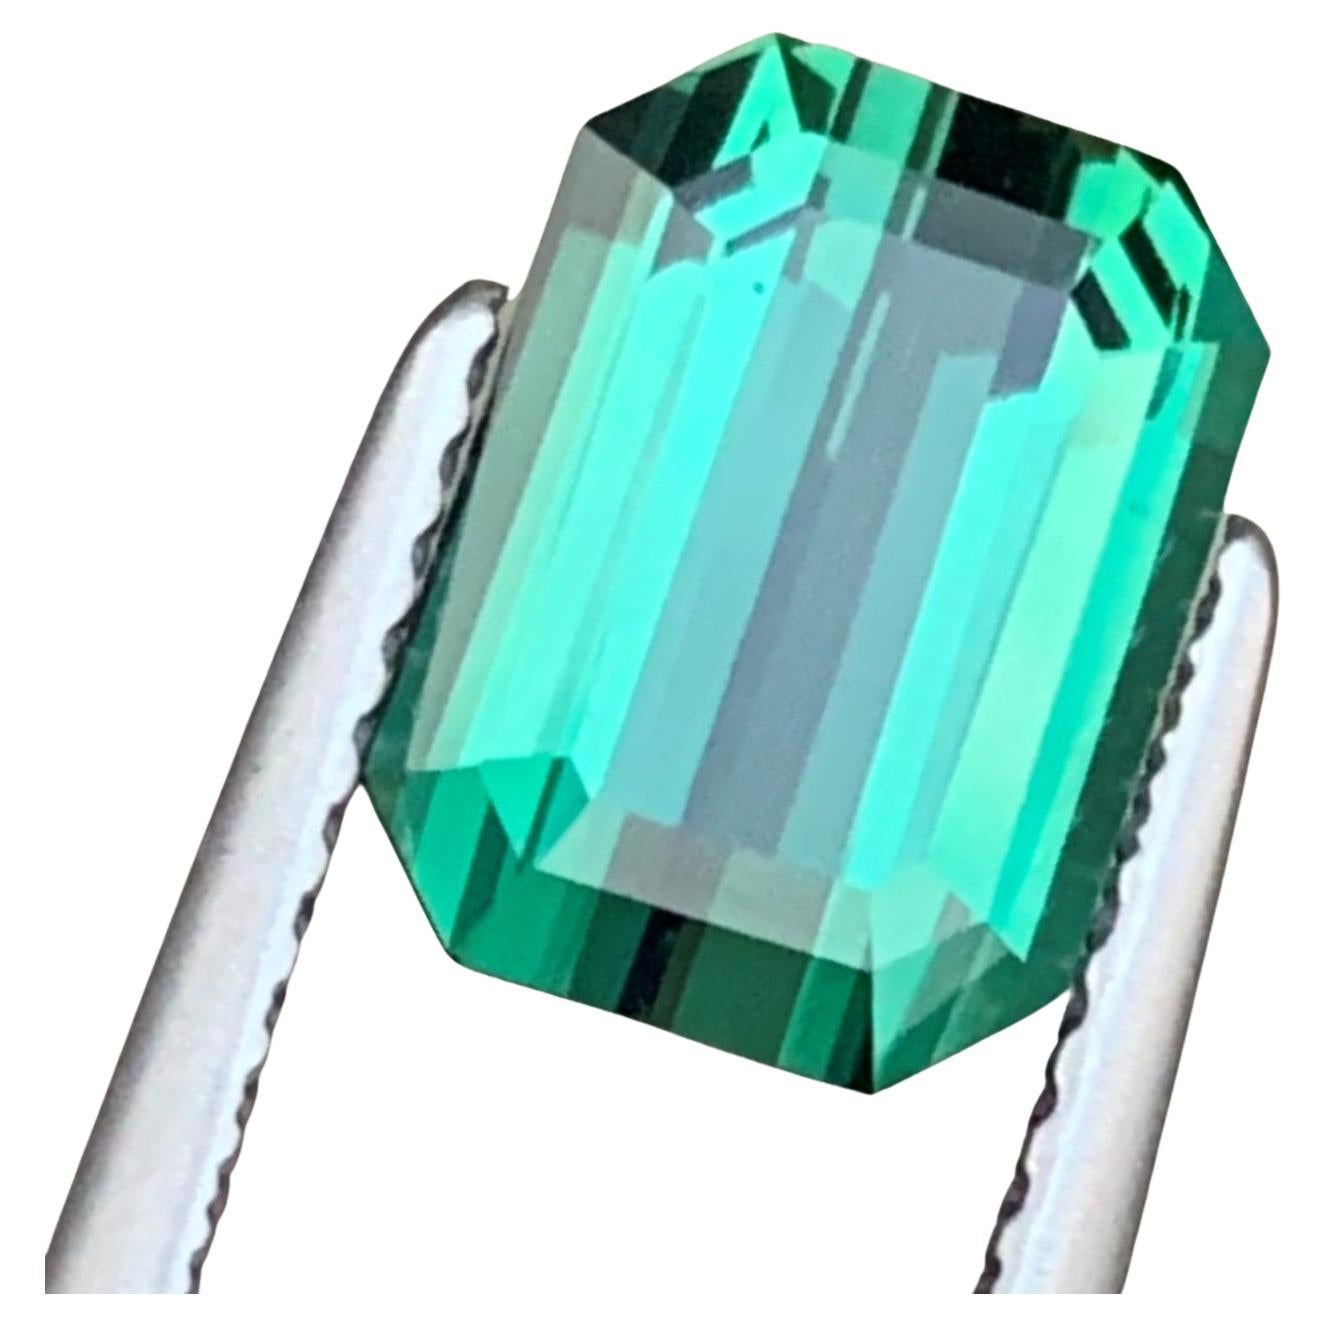 2.20 Carat Loose Lagoon Tourmaline Emerald Shape Gemstone Available for Sell